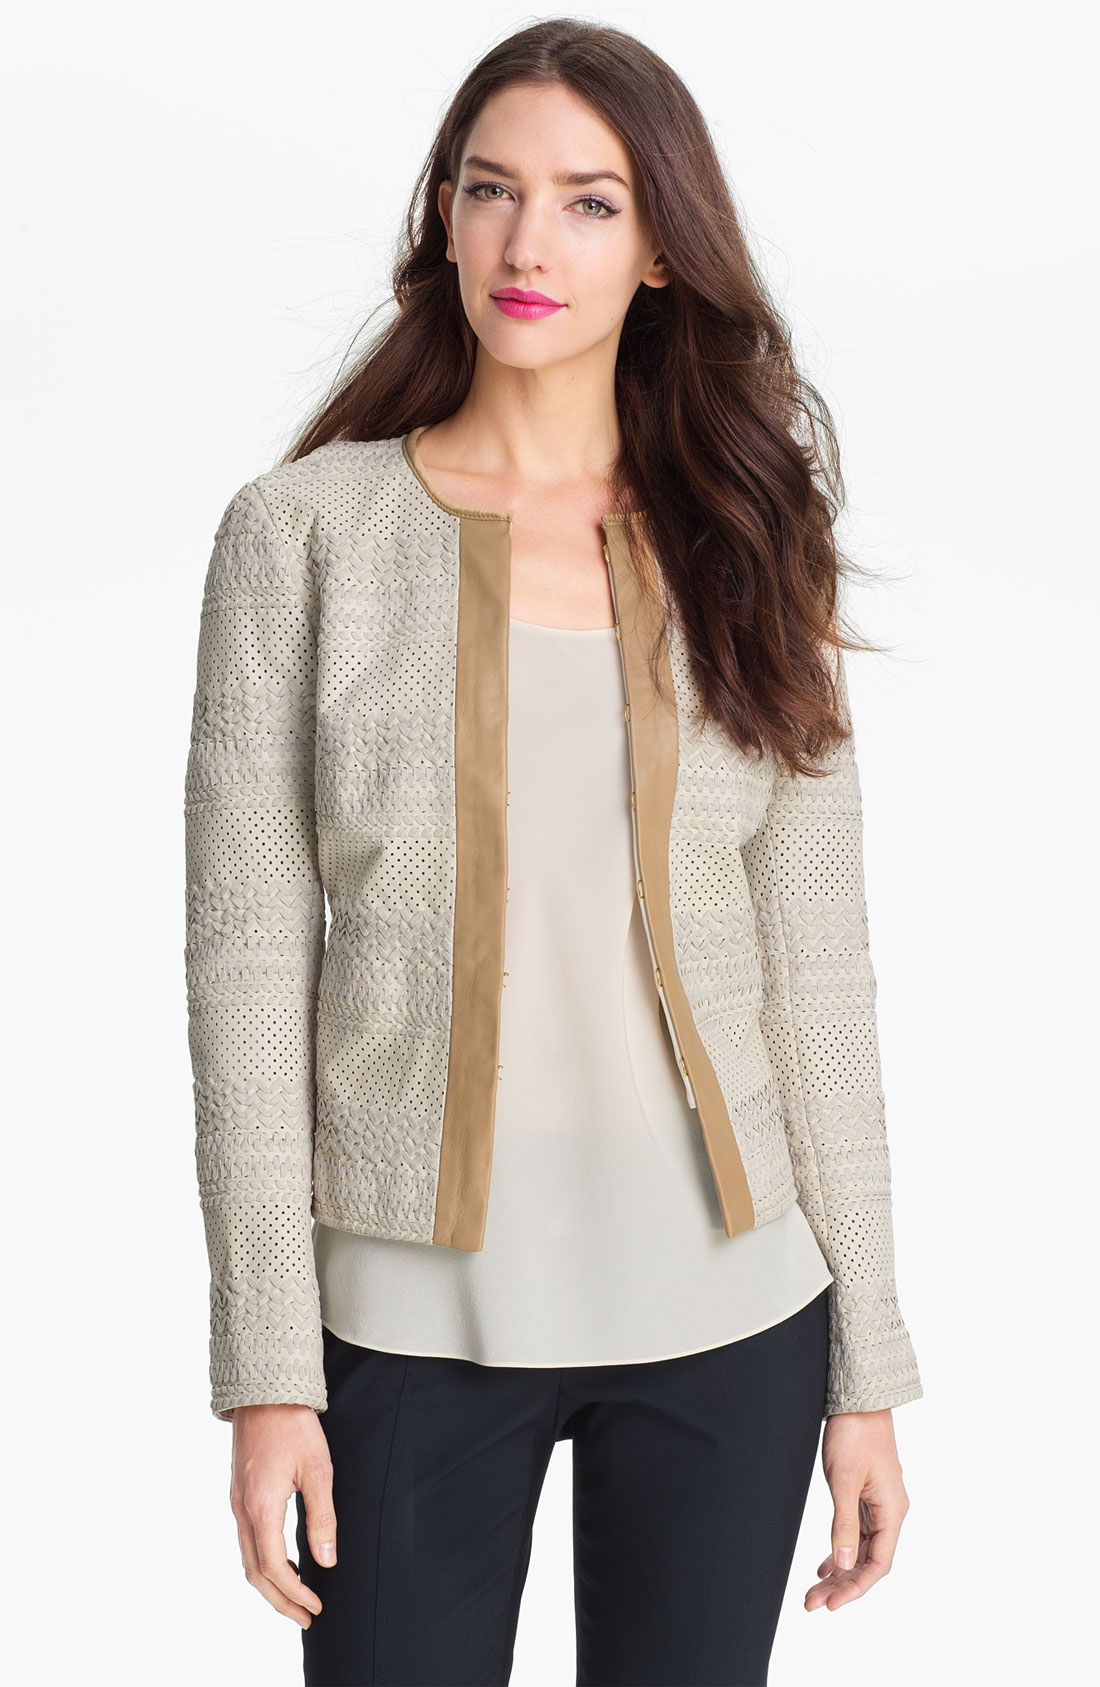 Tory Burch Autumn Leather Jacket in Beige (poundcake with tonal ribbons ...